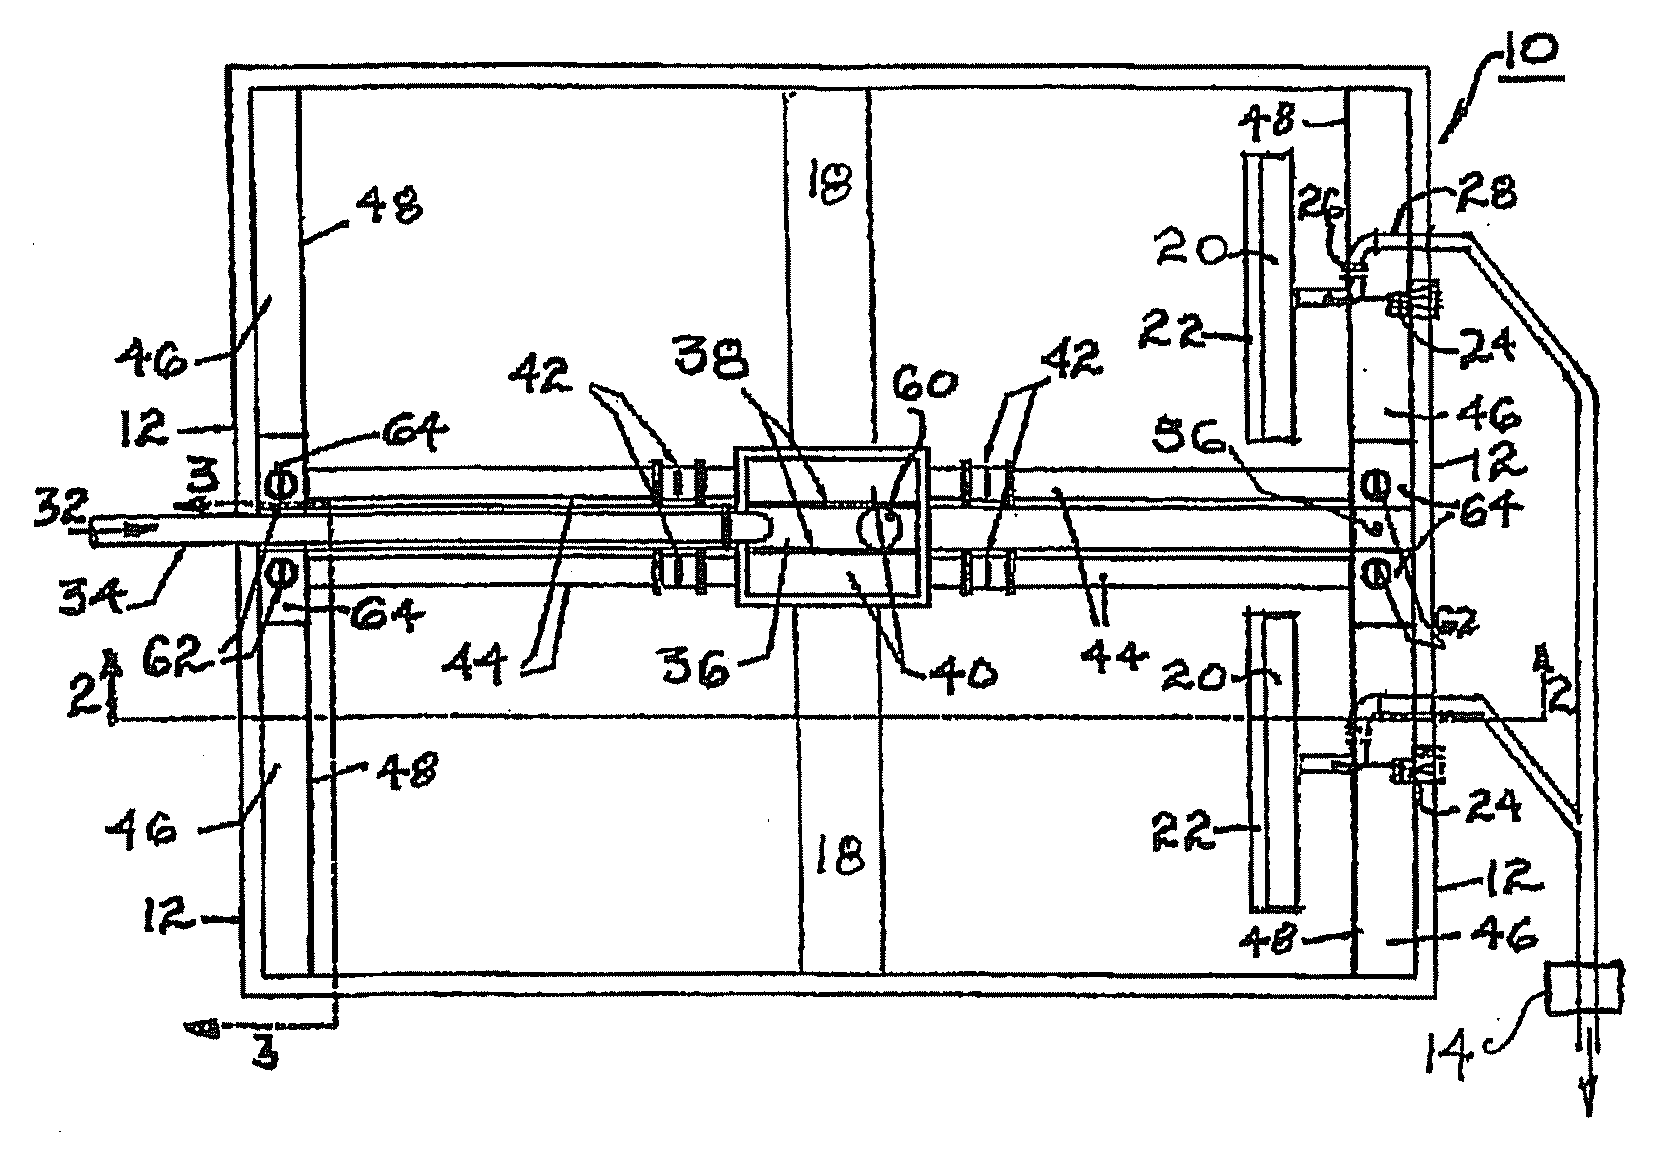 Self-cleaning influent feed system for a wastewater treatment plant